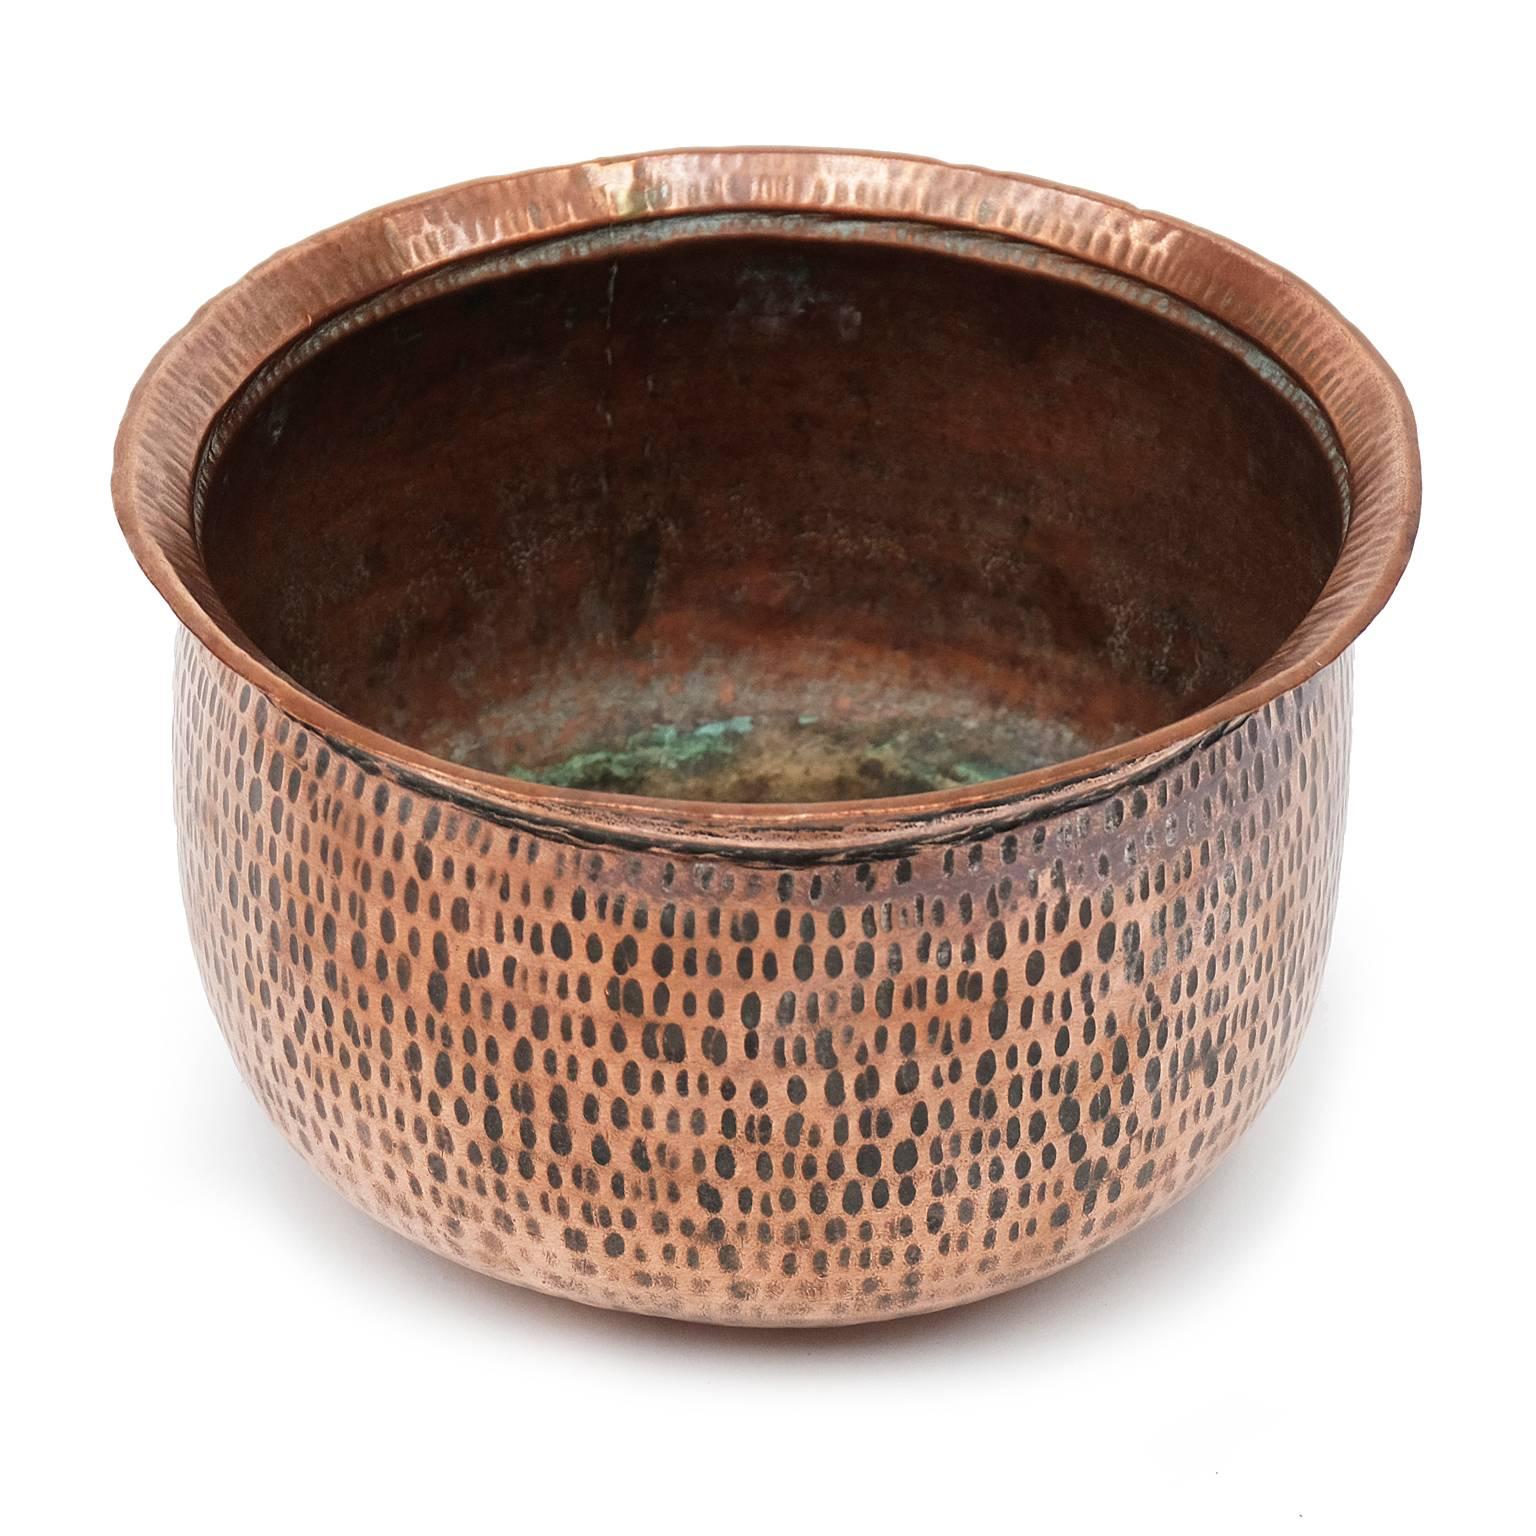 1950s copper planter designed and manufactured in the UK.

Hammered copper pattern.

Measures: H 18 cm x D 28 cm.